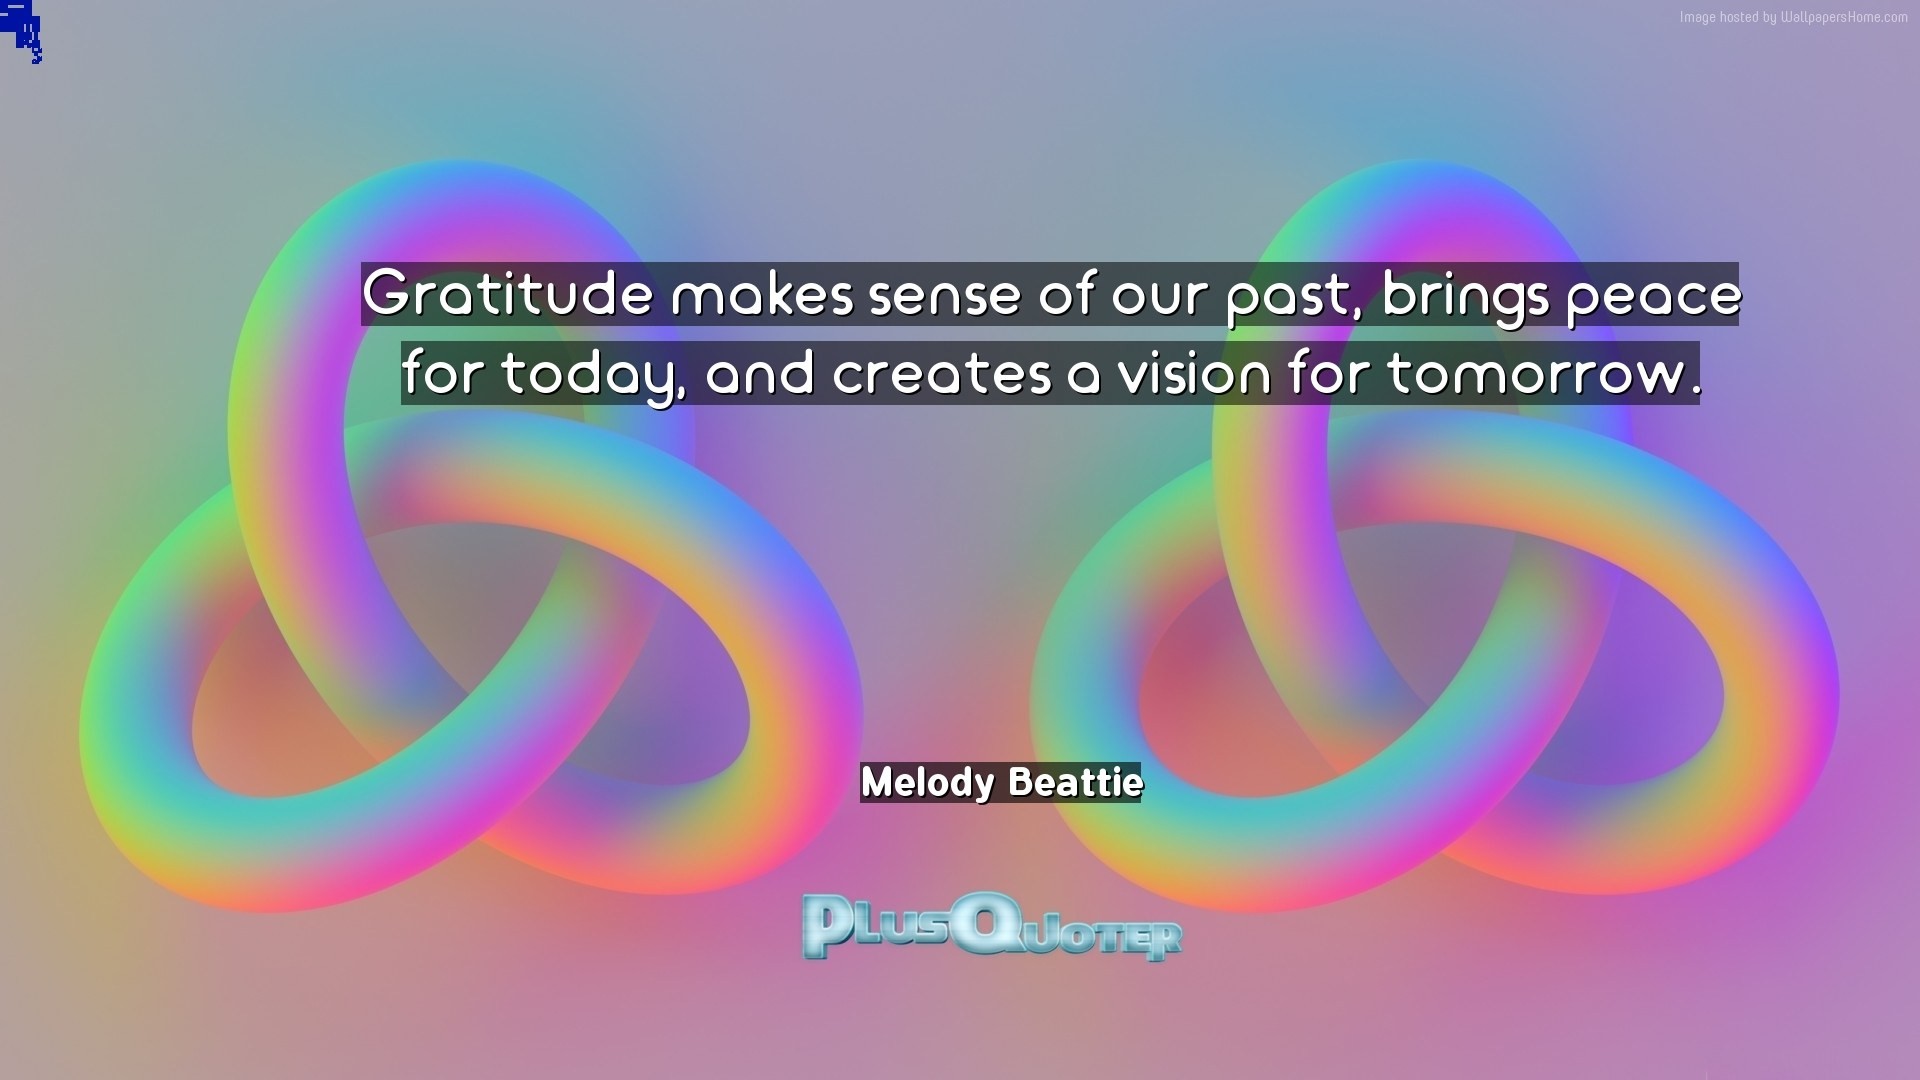 1920x1080 Download Wallpaper with inspirational Quotes- "Gratitude makes sense of our  past, brings peace